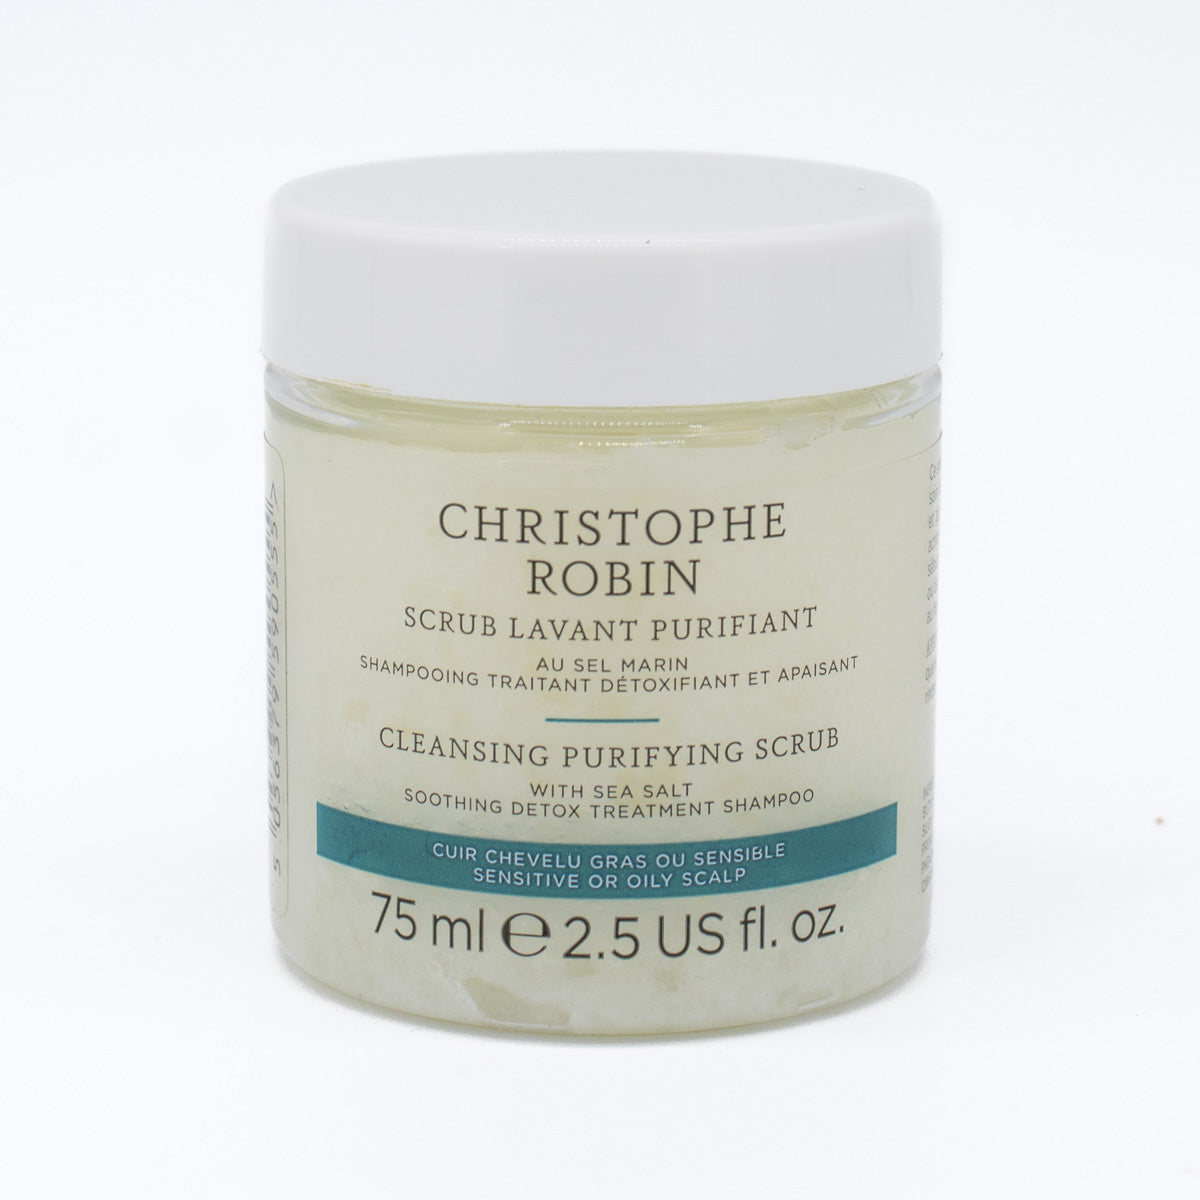 CHRISTOPHE ROBIN Cleansing Purifying Scrub with Sea Salt 2.5oz - New